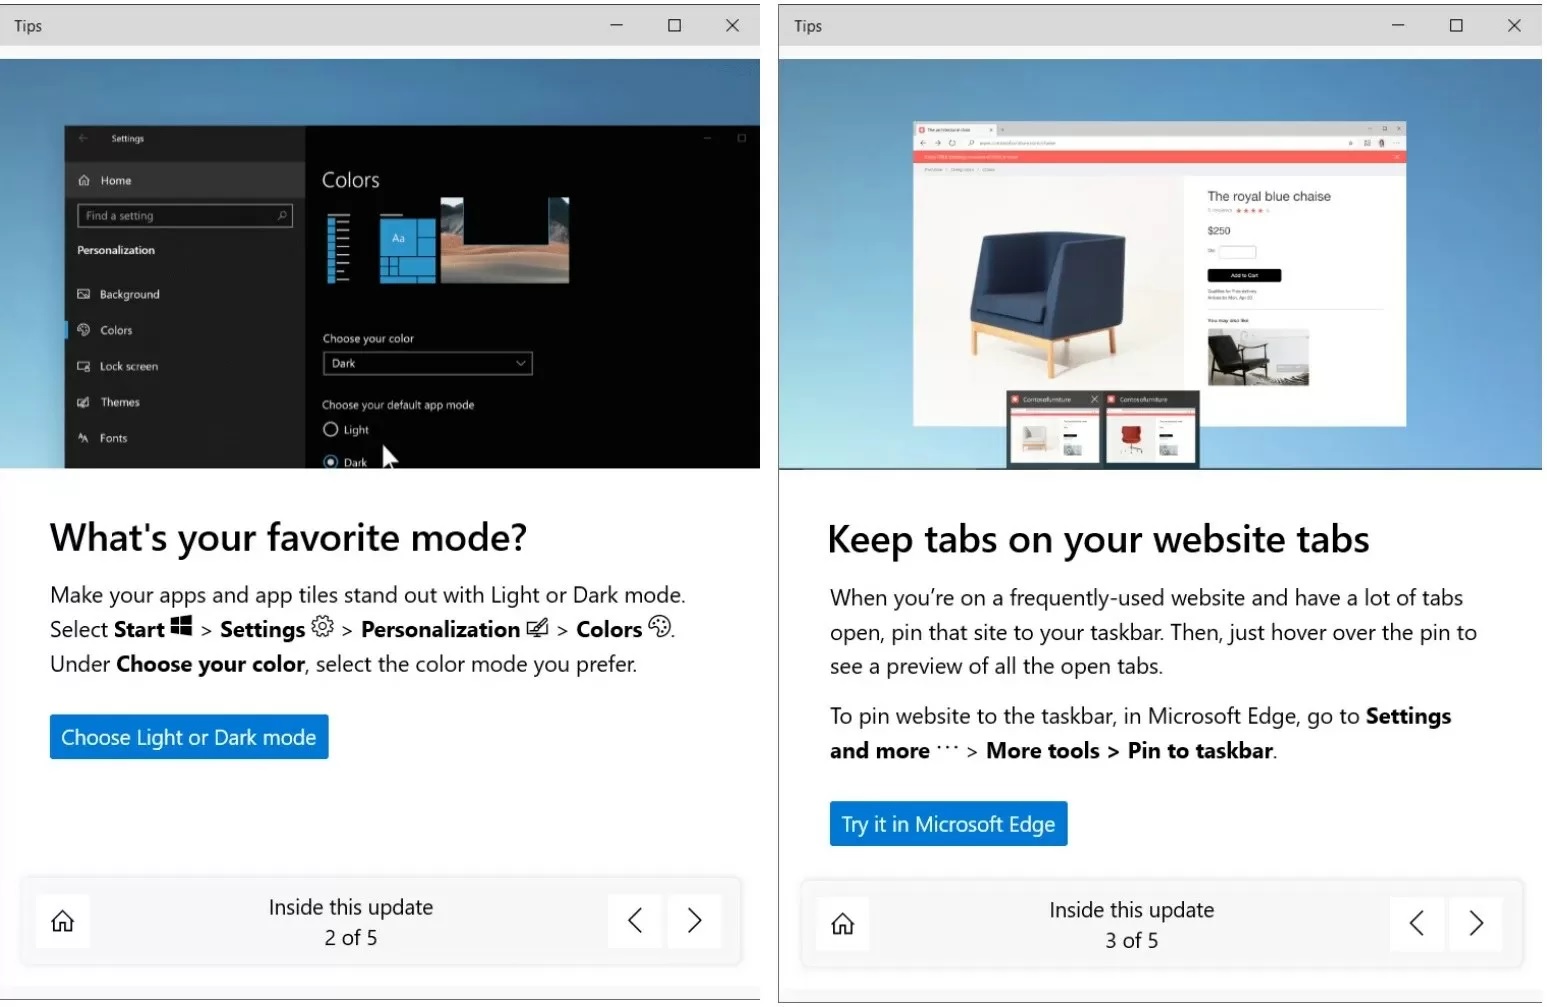 Windows 10 to get features, UX improvements from modular OS Windows-10-post-update-experience.jpg